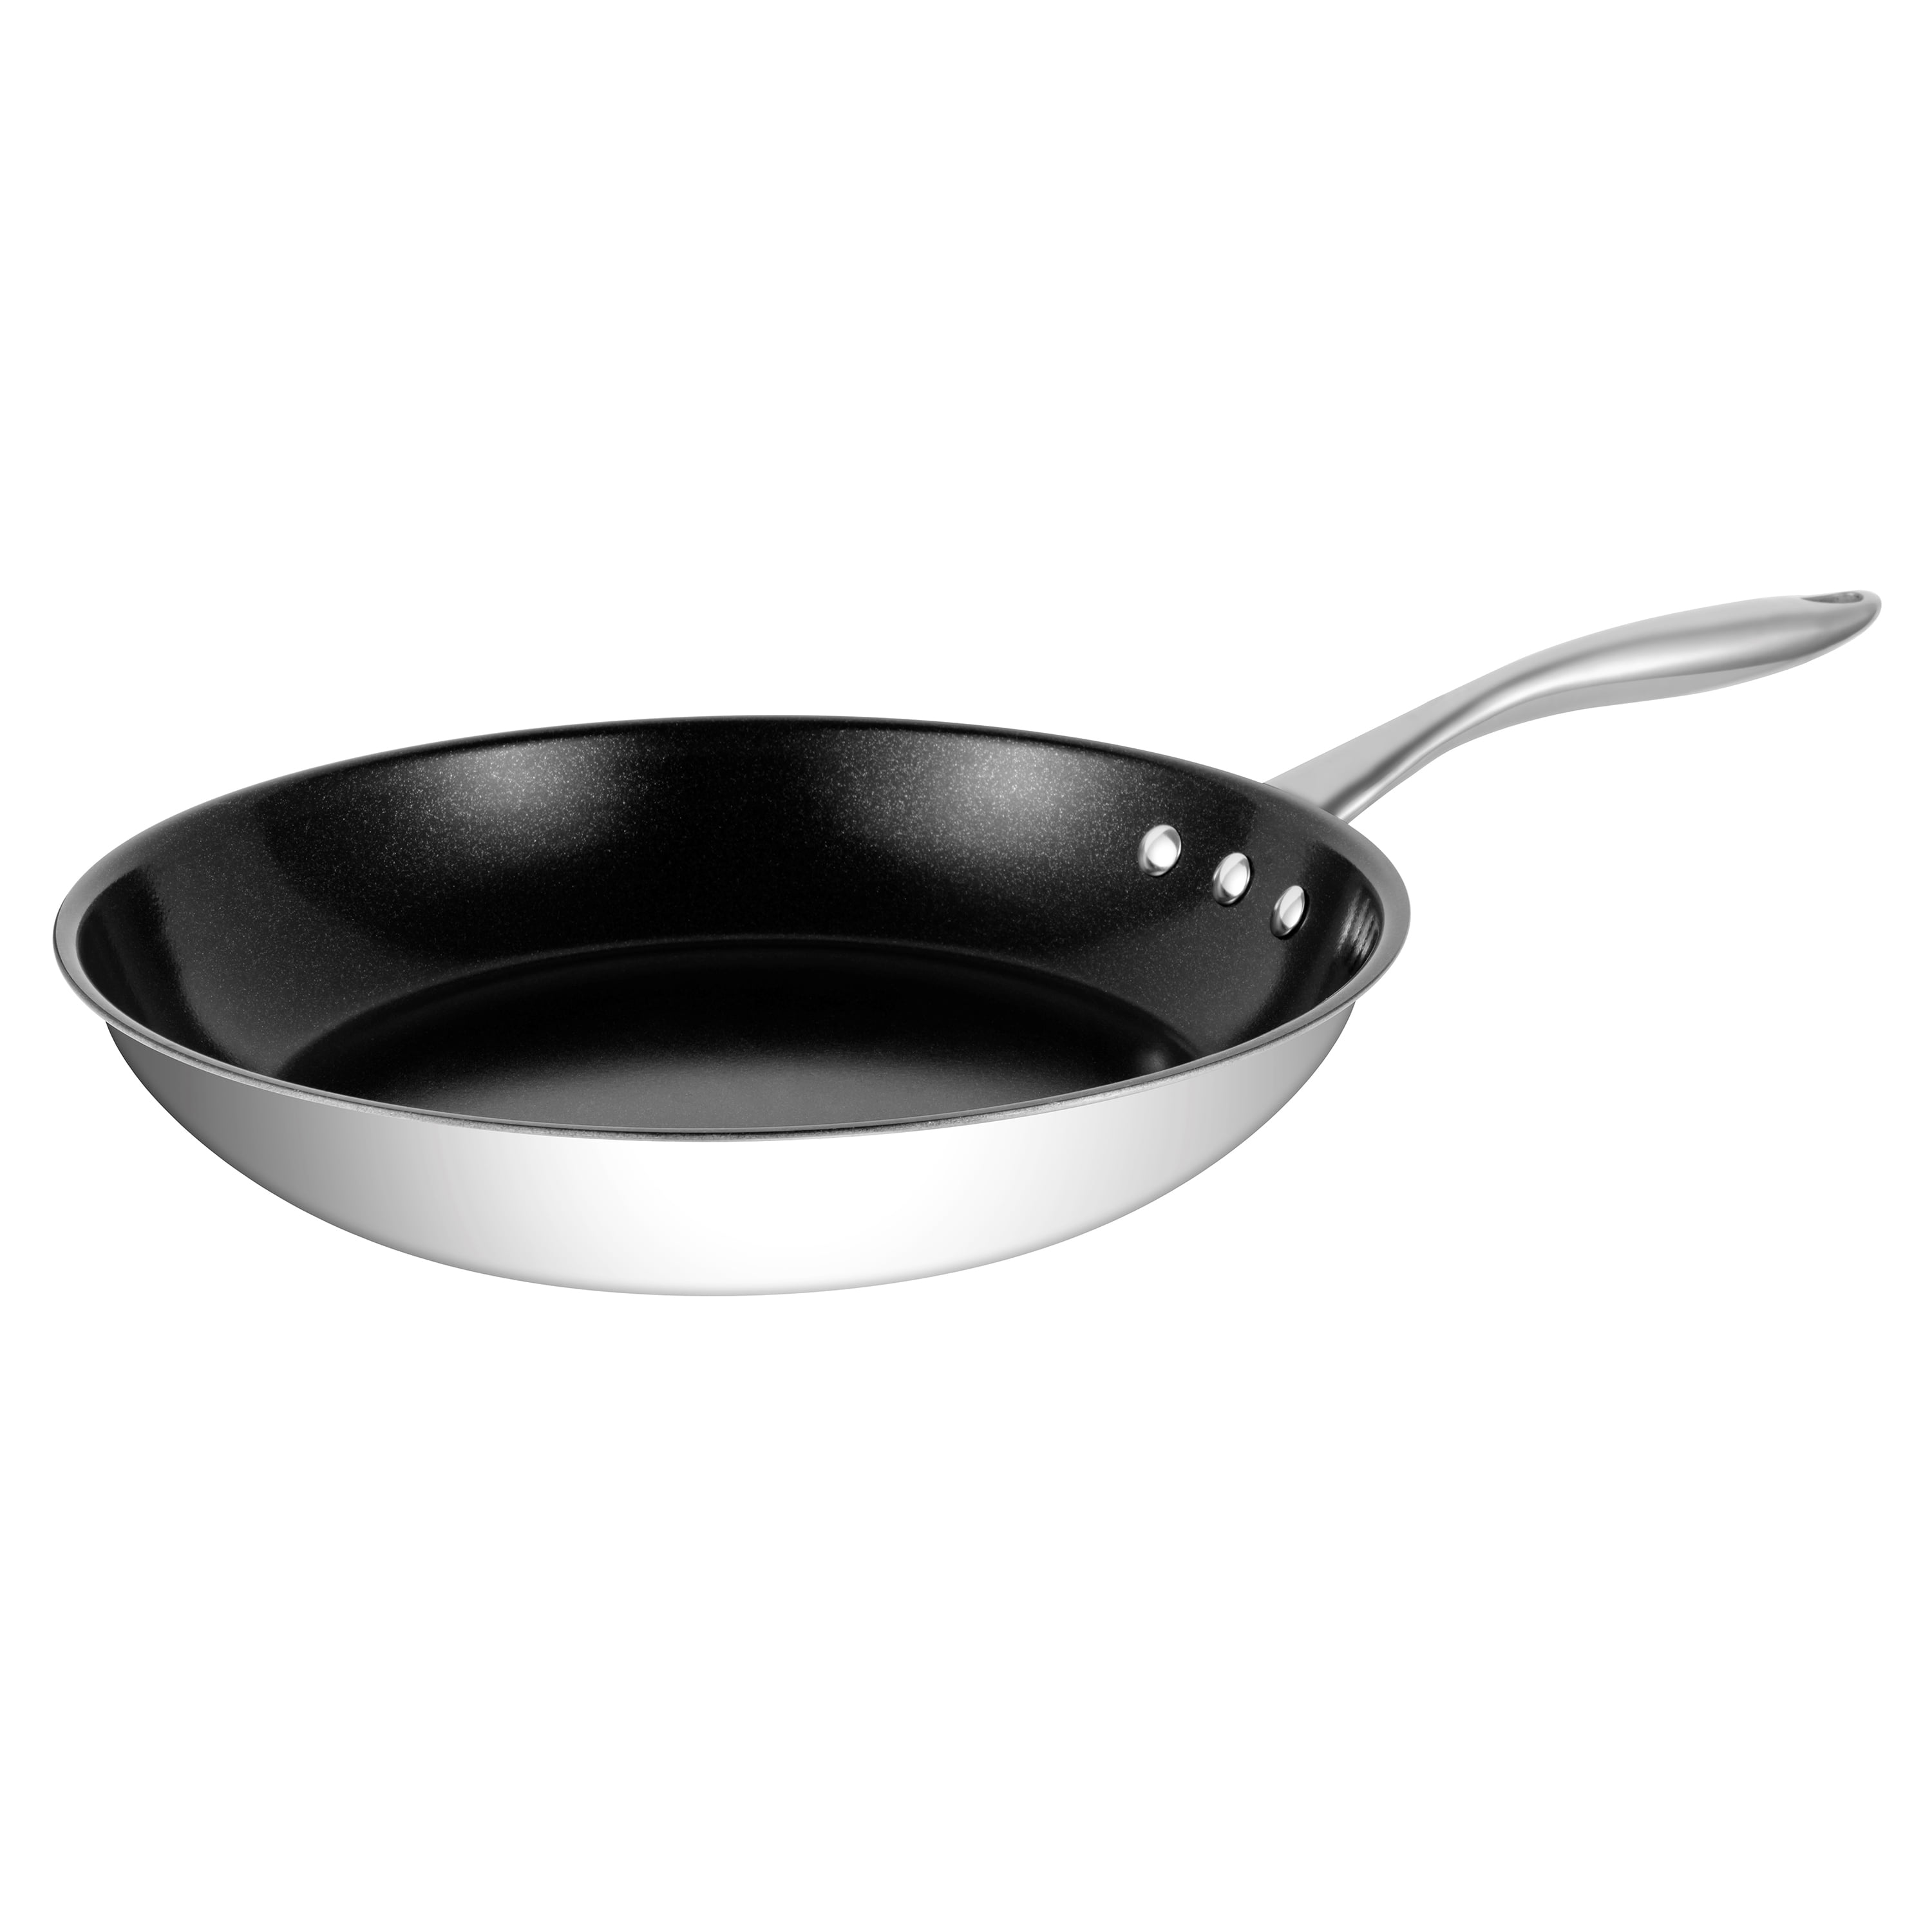 YOSUKATA Coating-Free Carbon Steel Pan - Durable 10 1/4 Inch Frying Pan -  Pans for Cooking Delicious Meals - Carbon Steel Pan with Removable